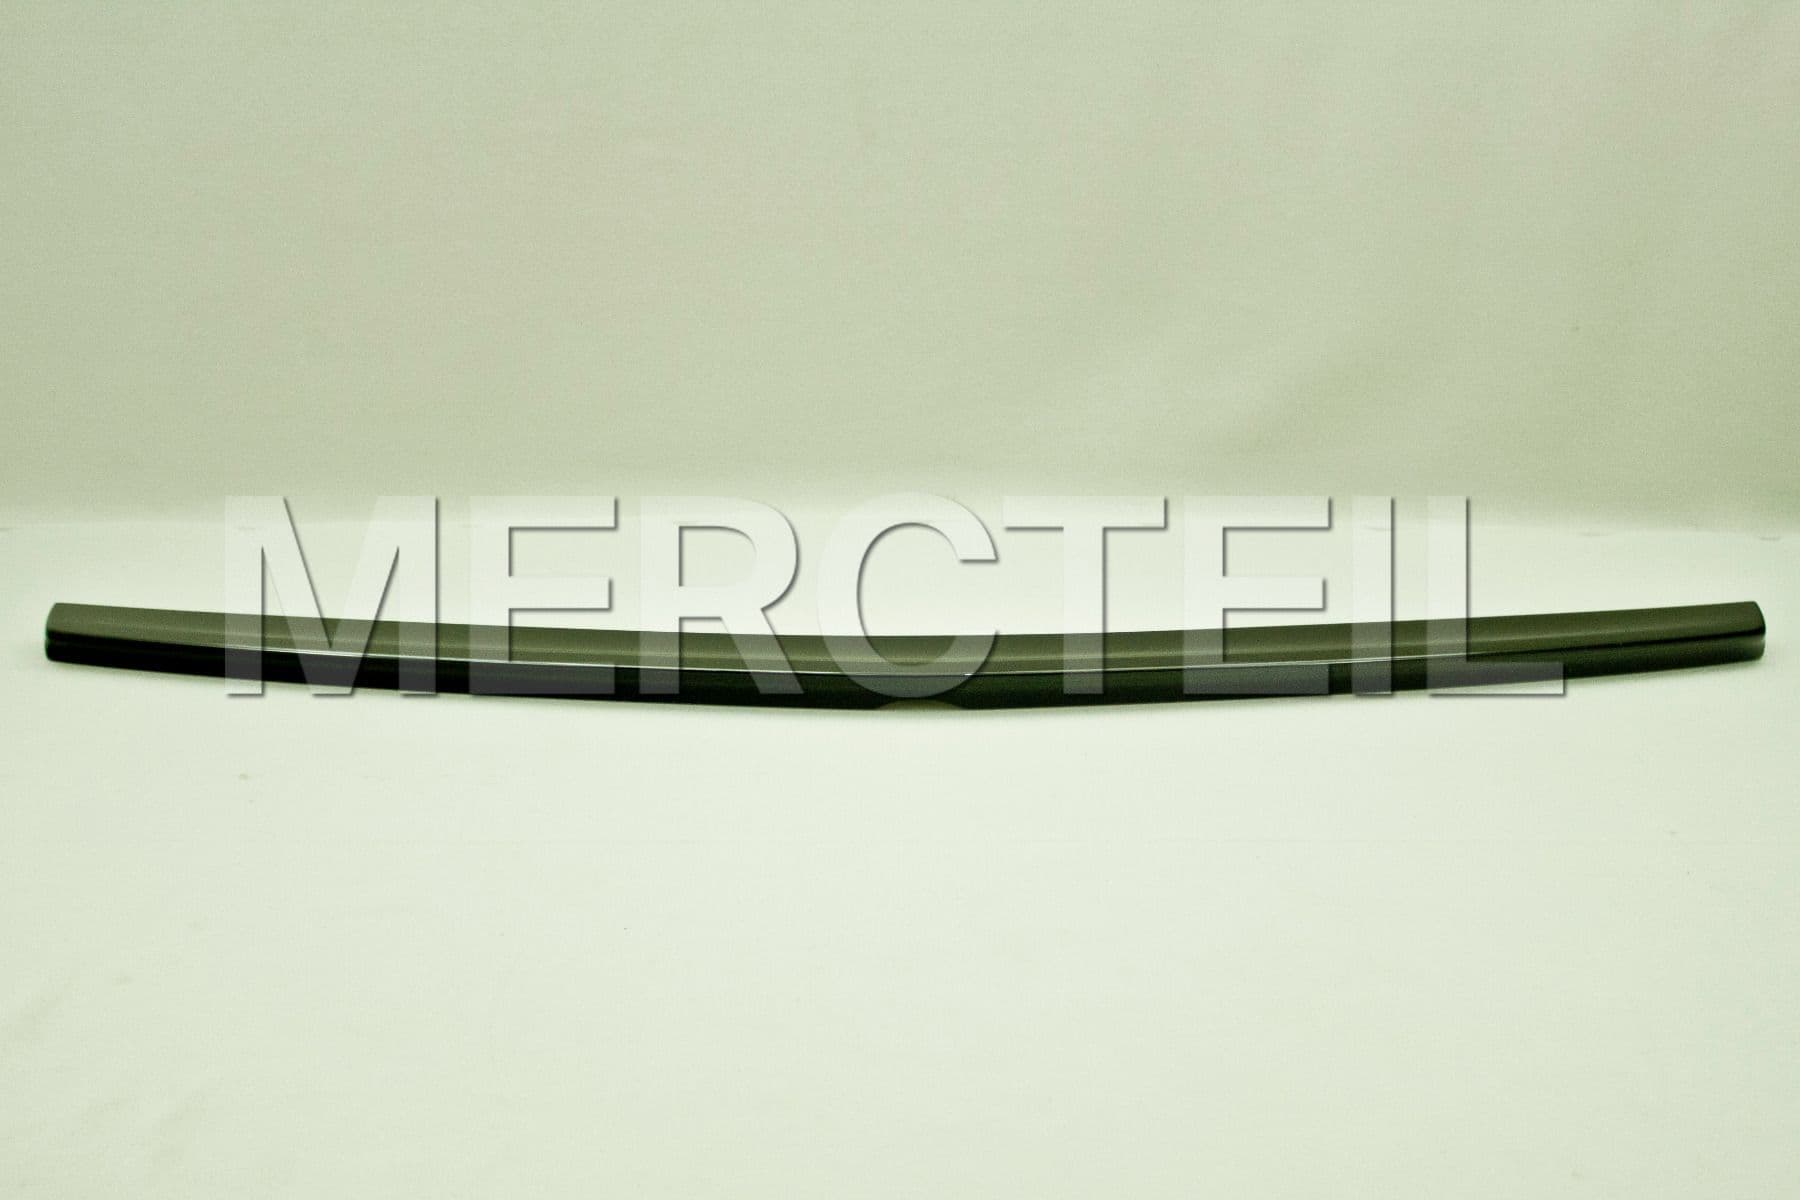 AMG Performance Rear Spoiler for E-Class (part number: A21279003889999)